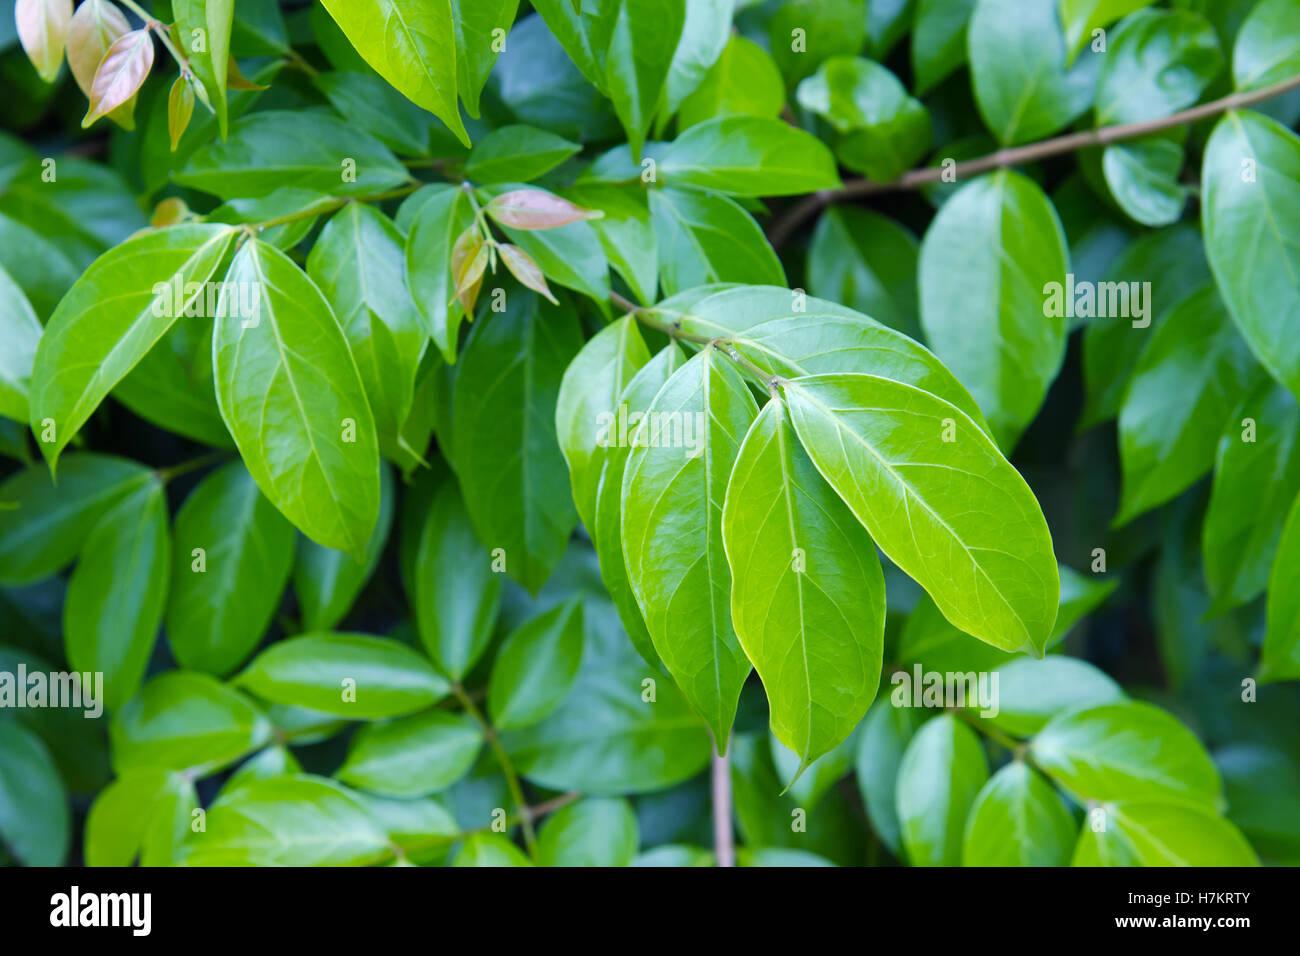 Osmanthus leaf (Also named as Apocynaceae Osmanthus, Oleeae, Oleaceae Osmanthus or Parameria barbata Schum.) in the garden Stock Photo